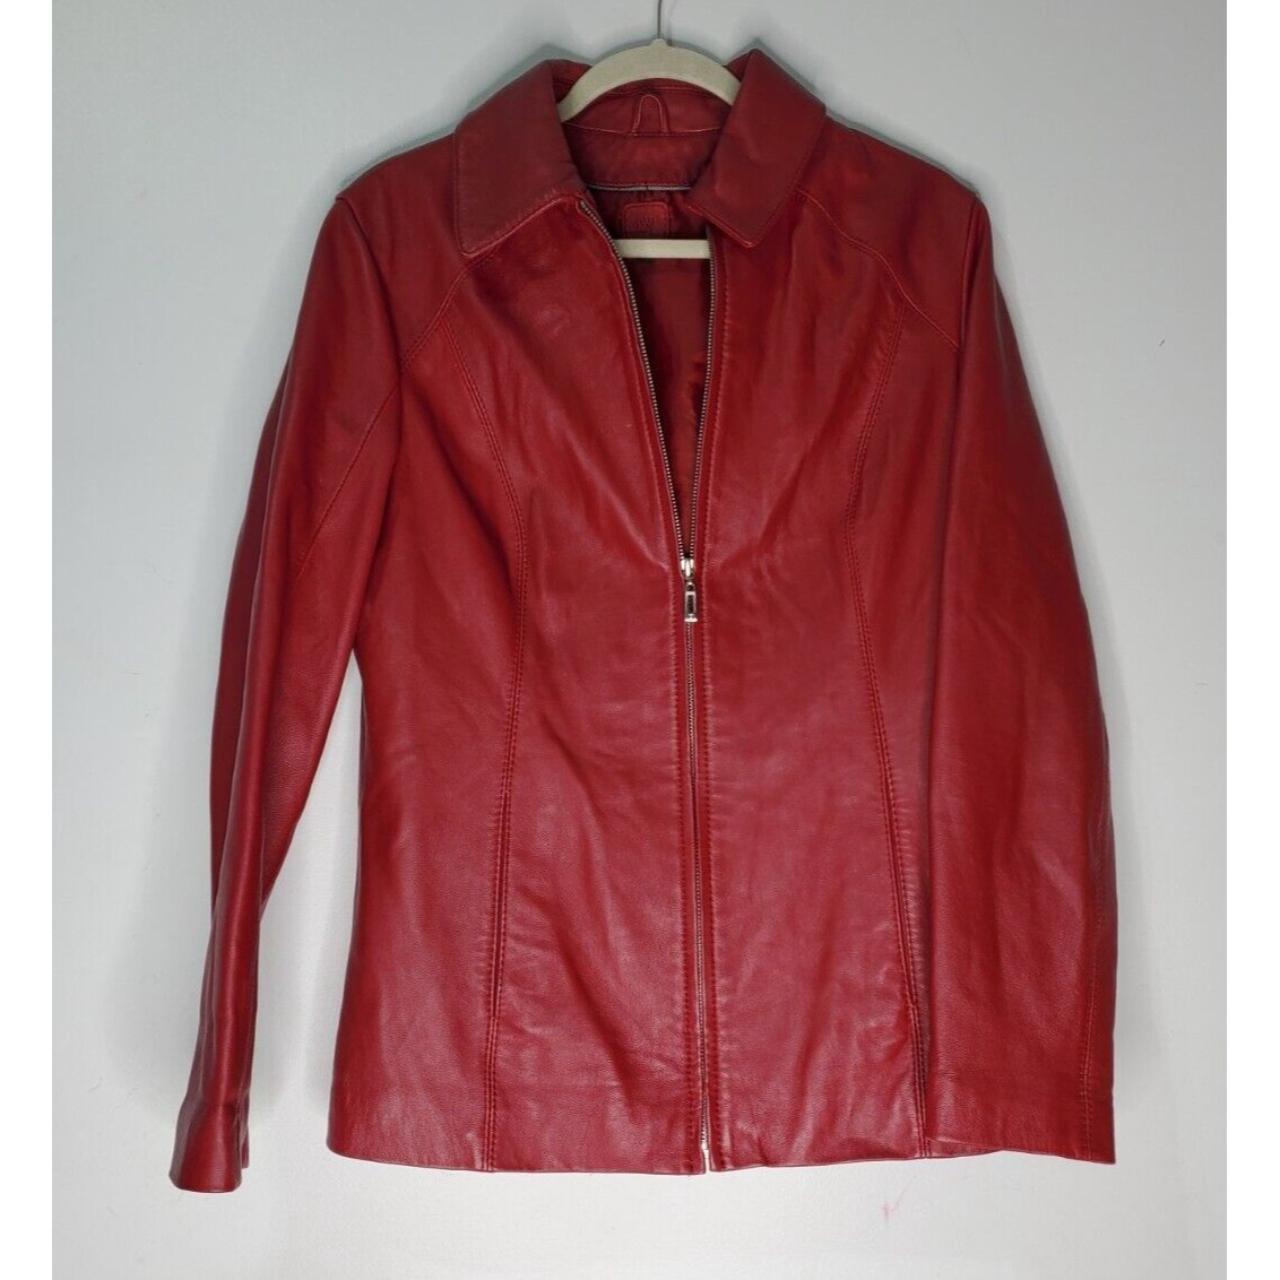 Product Image 1 - In good condition Wilsons Leather